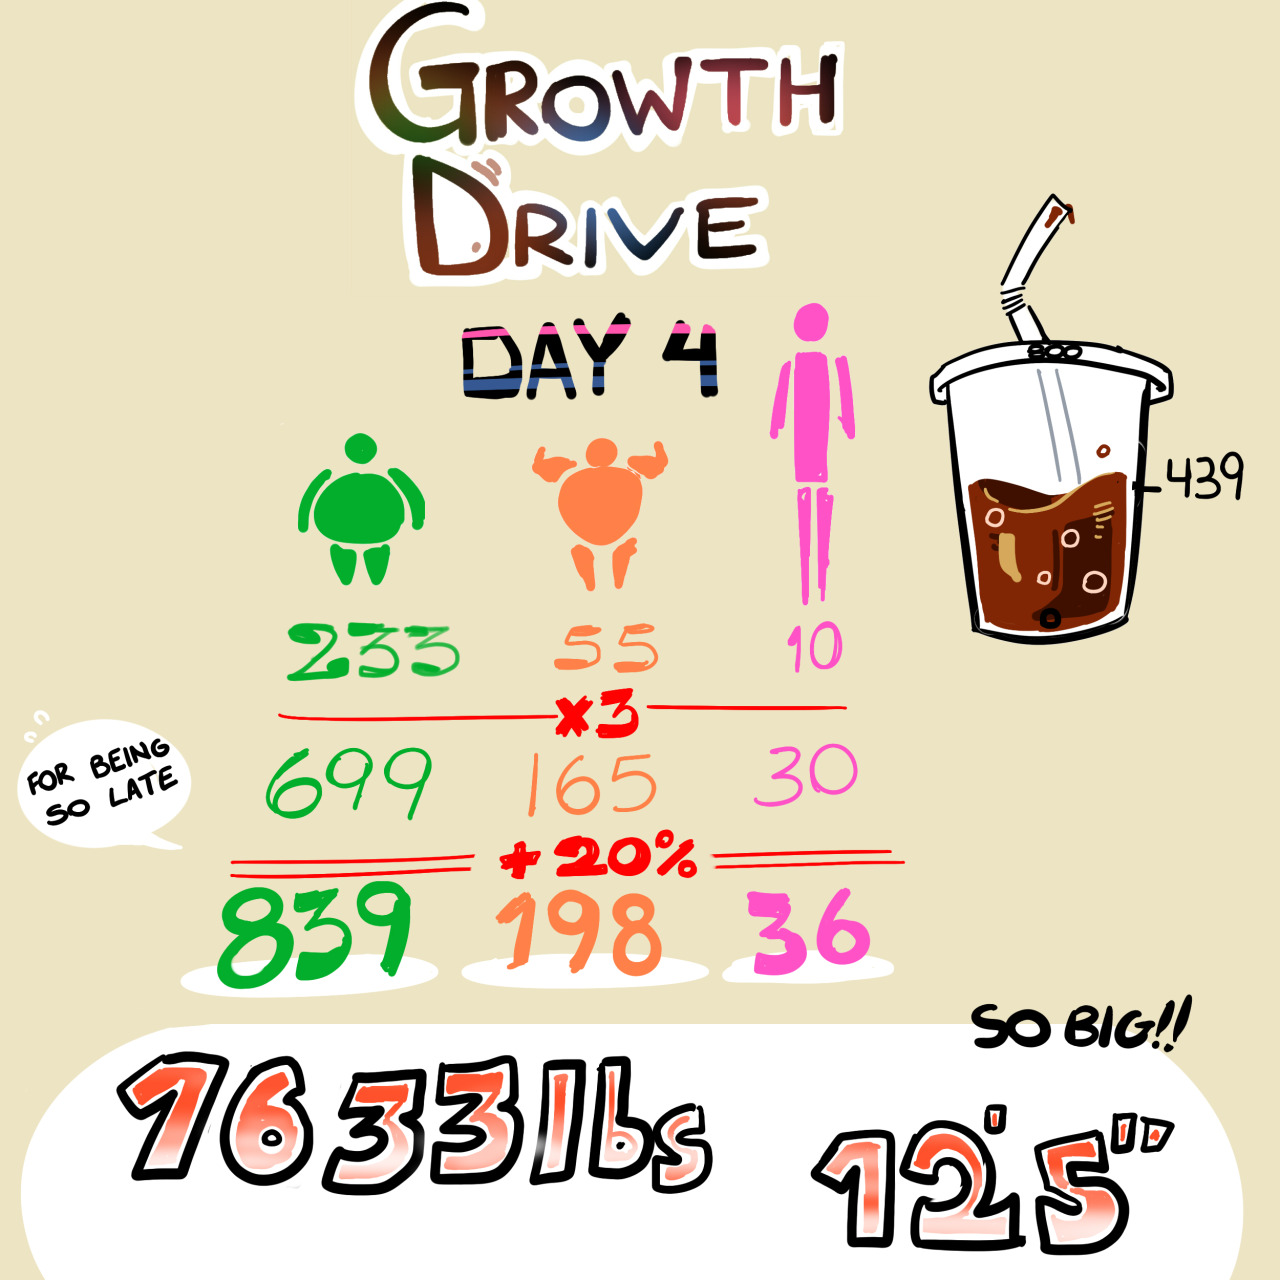 happymondayman:Growth Drive - Day 4 (1)   it’s finally here!!and boy he sure grew!I